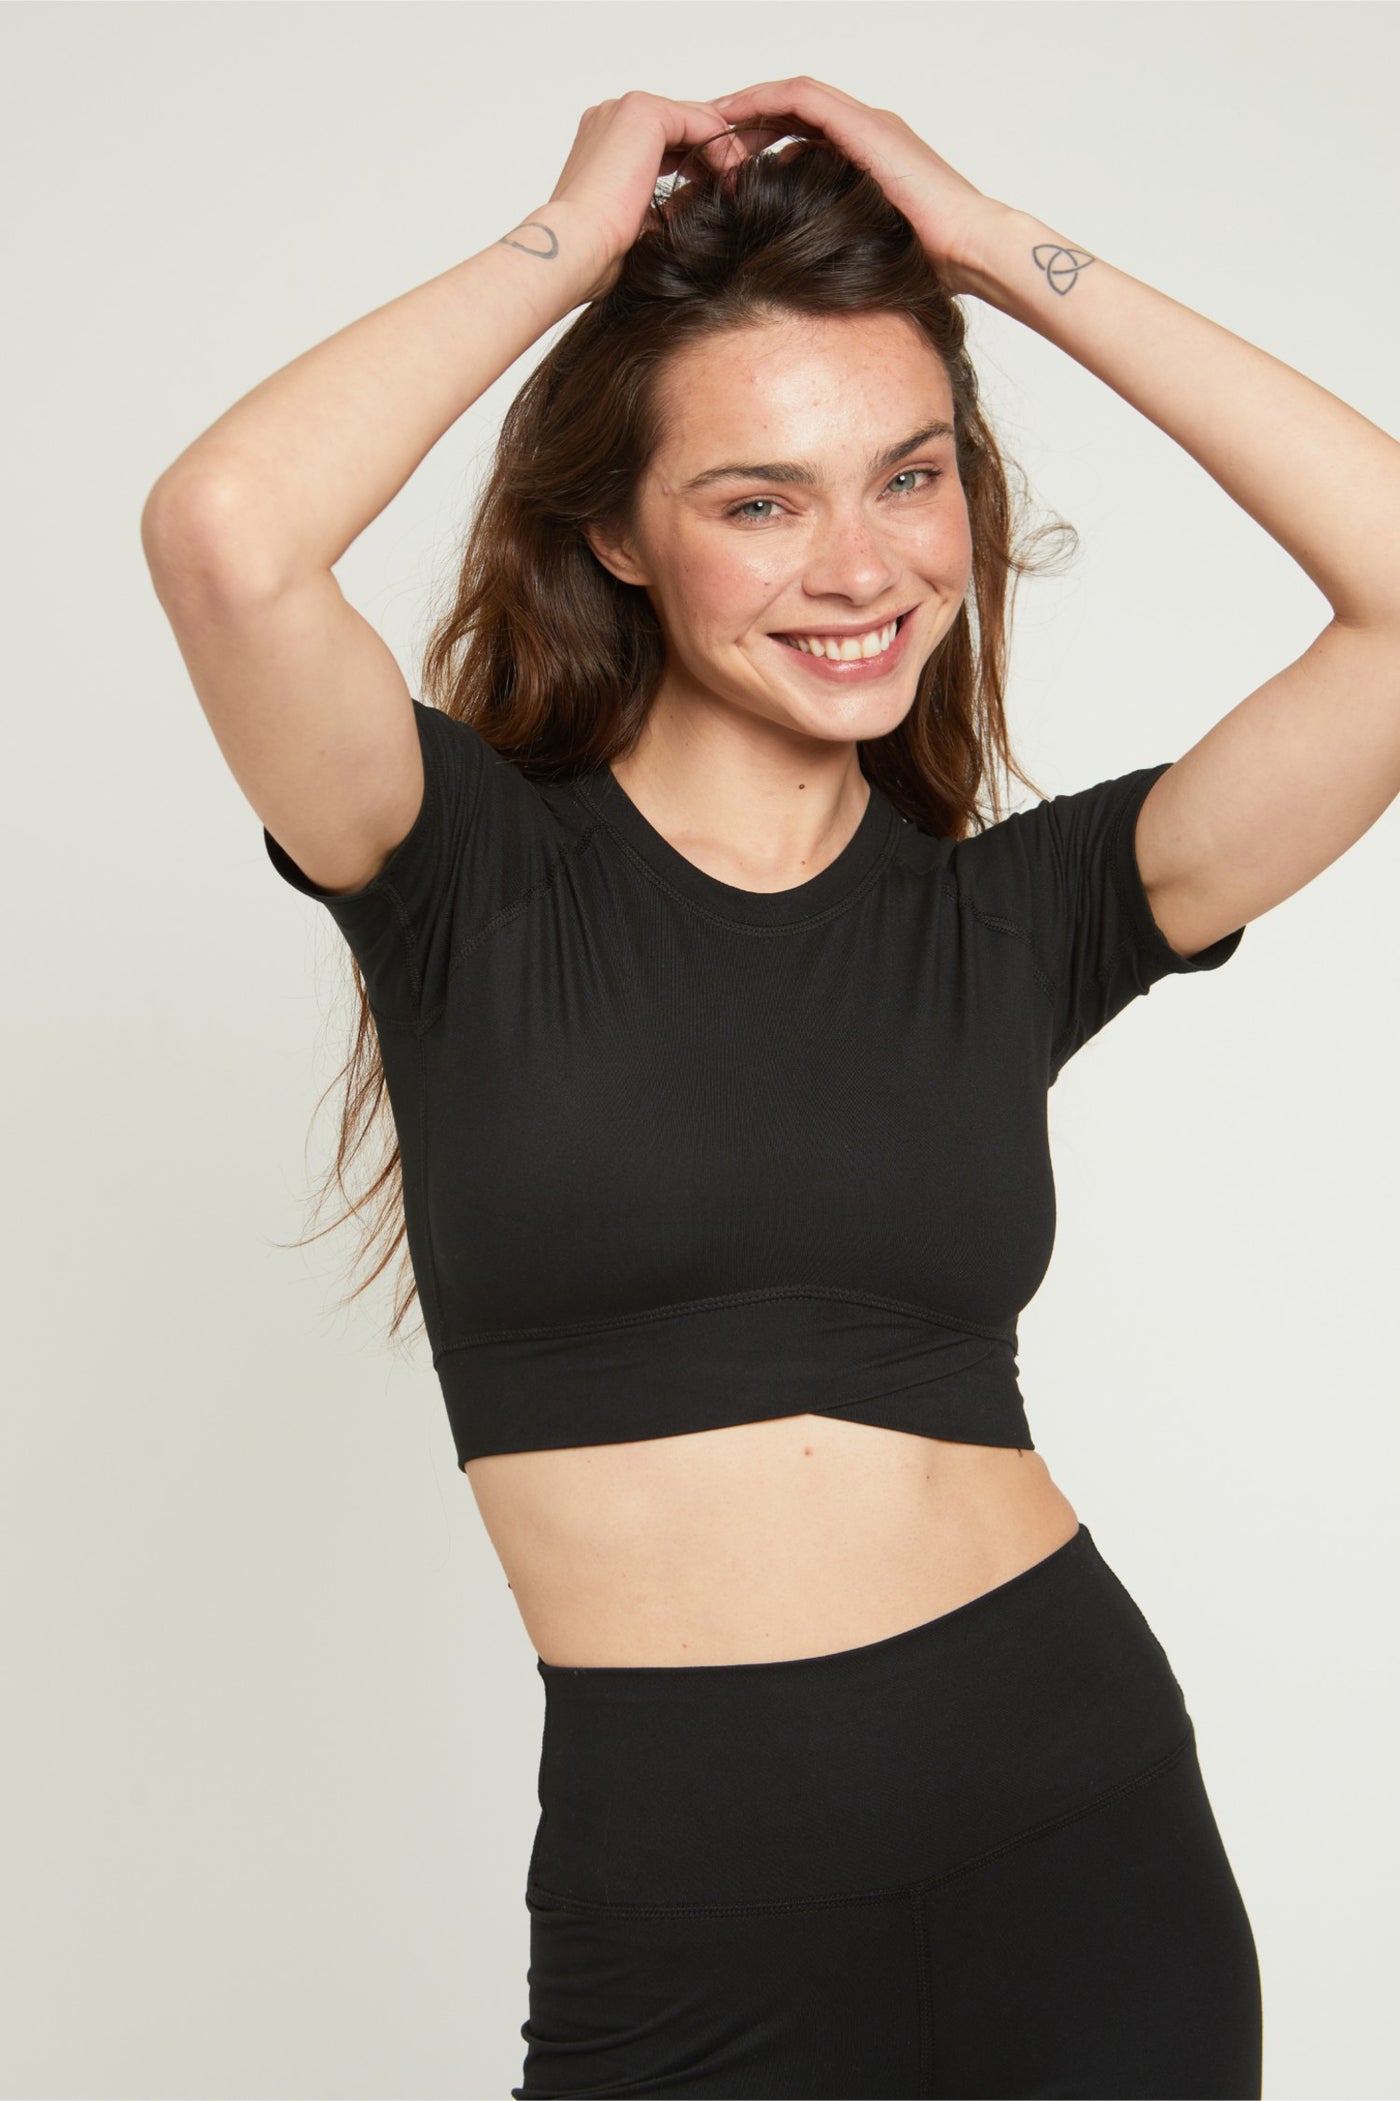 Cropped Top - Round Neck - Short Sleeves